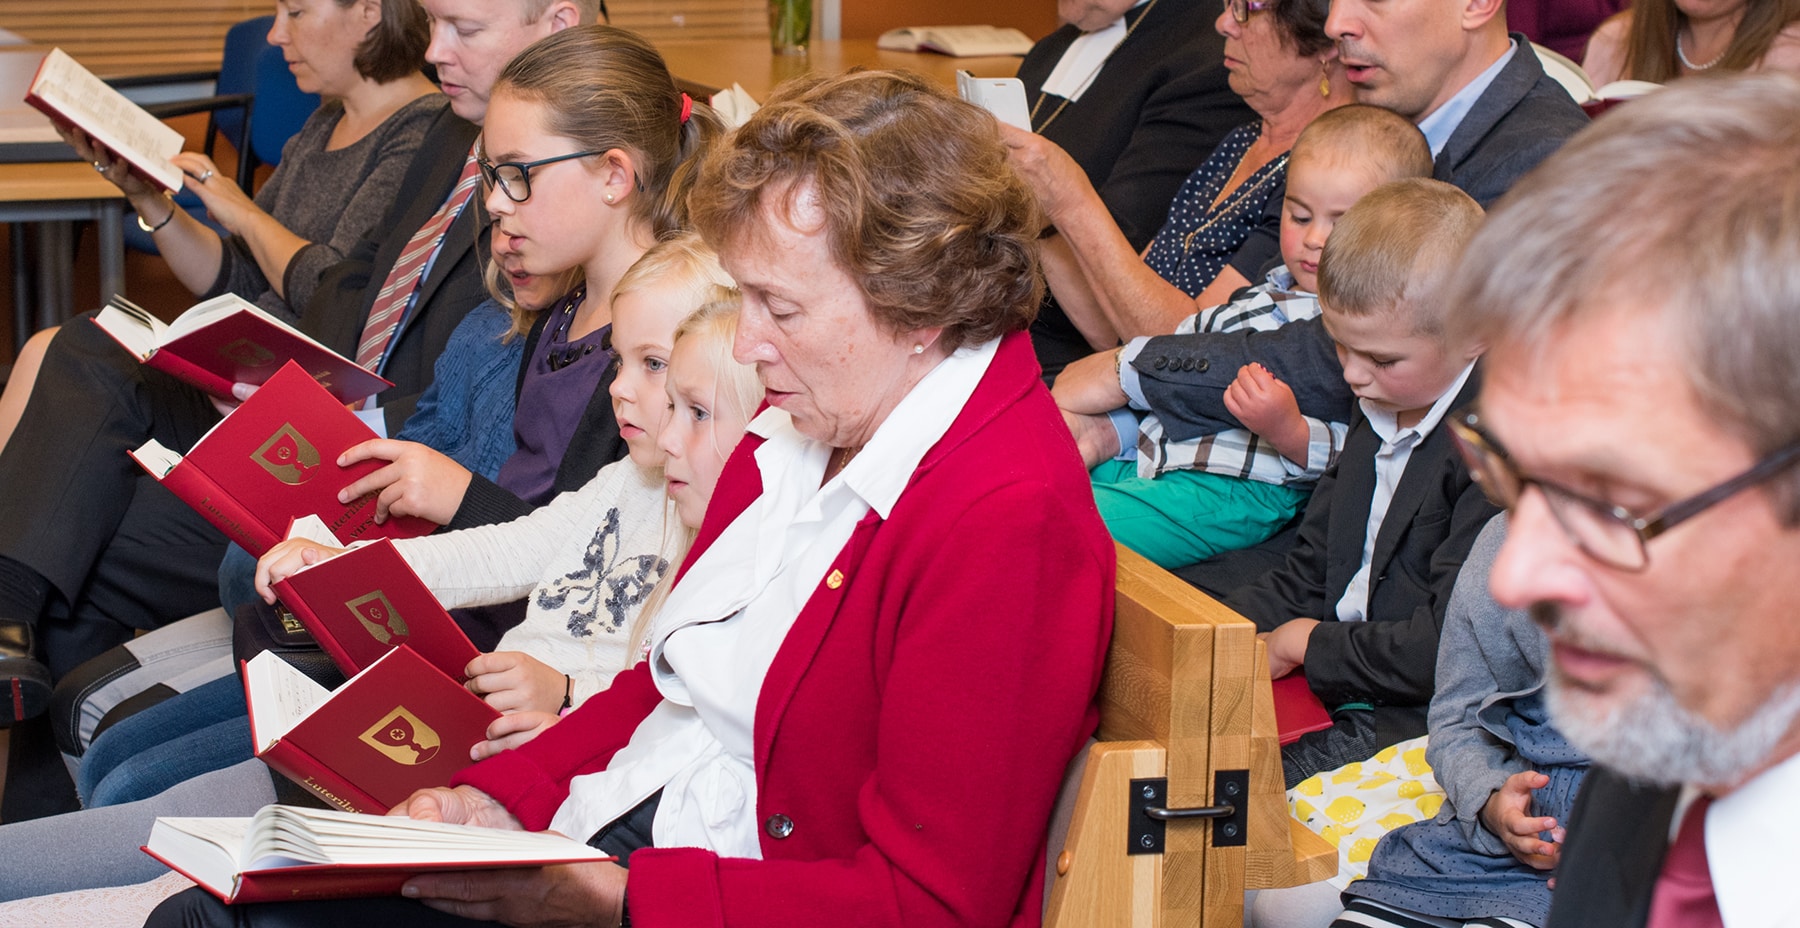 Finland People Singing From Hymnals